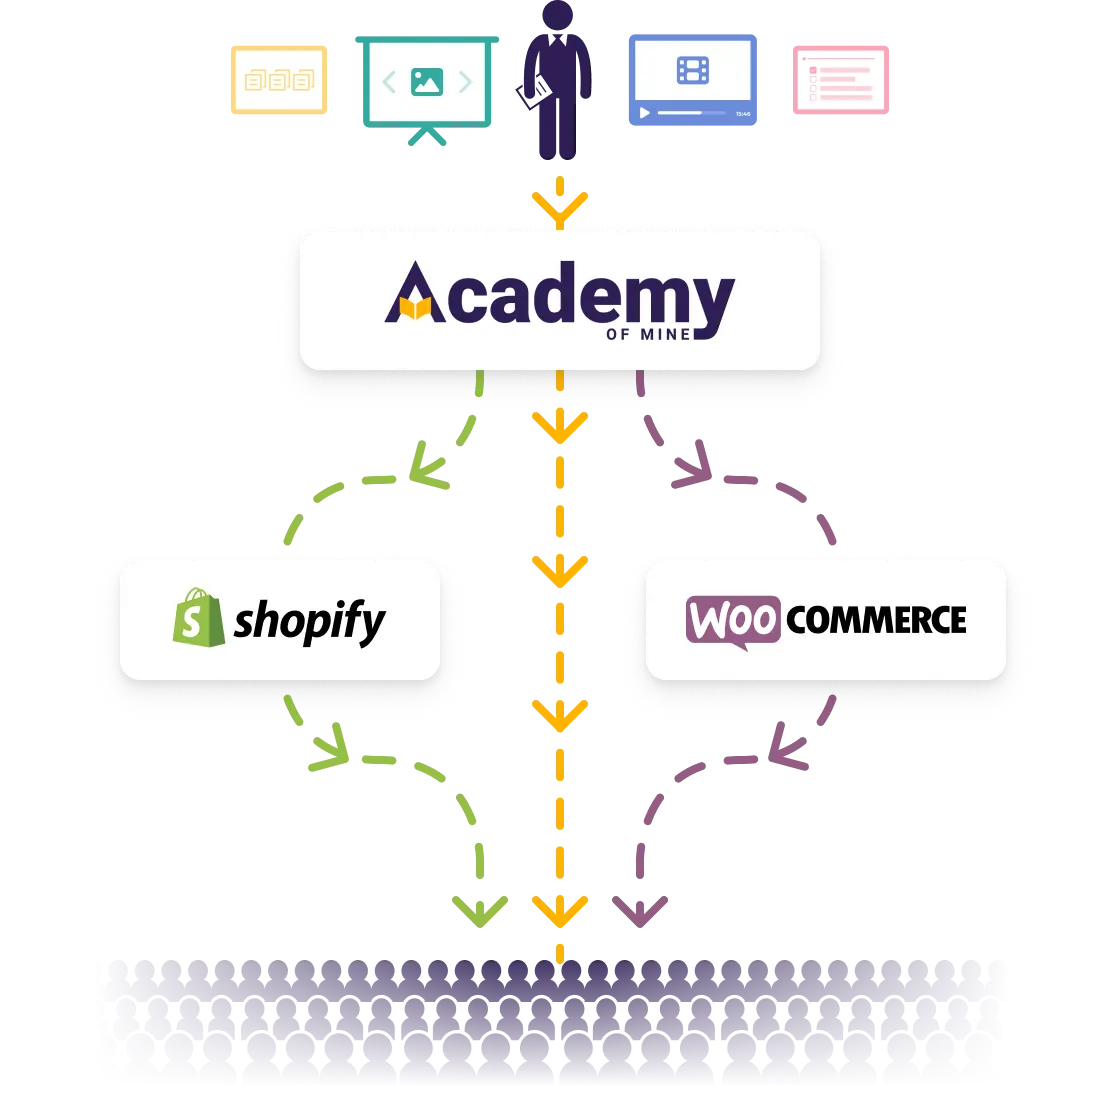 eCommerce selling methods (direct, Shopify, WooCommerce) graphic